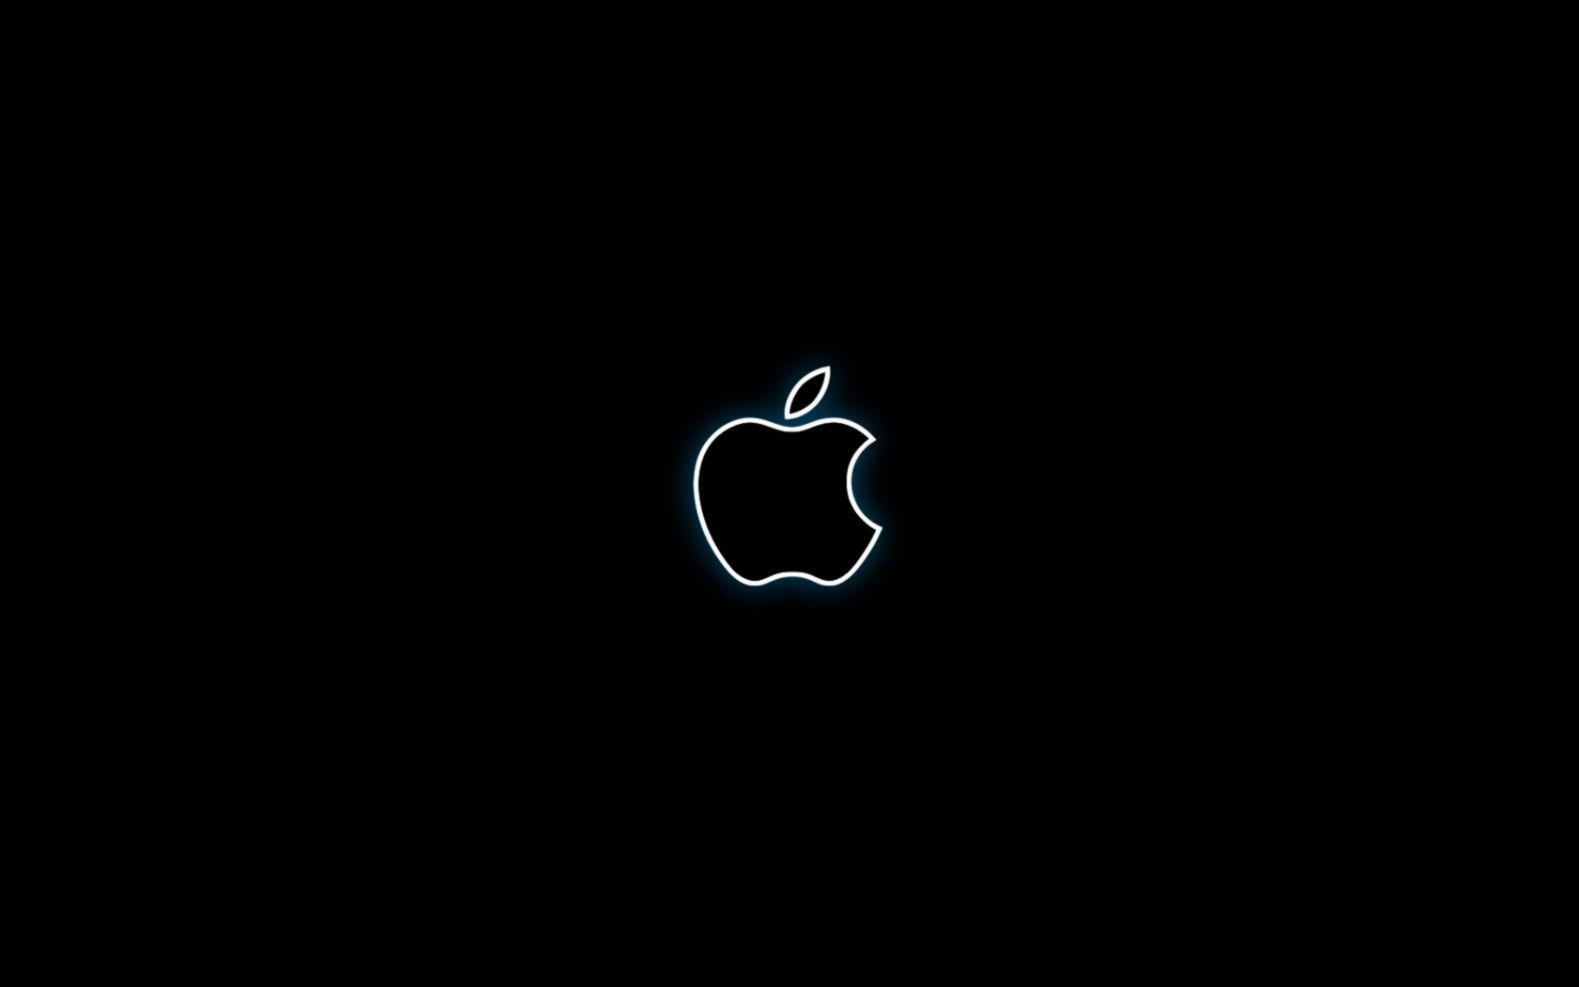 White and Blue Apple Logo - Apple Logo Hd Wallpapers Free Download | Dom Wallpapers